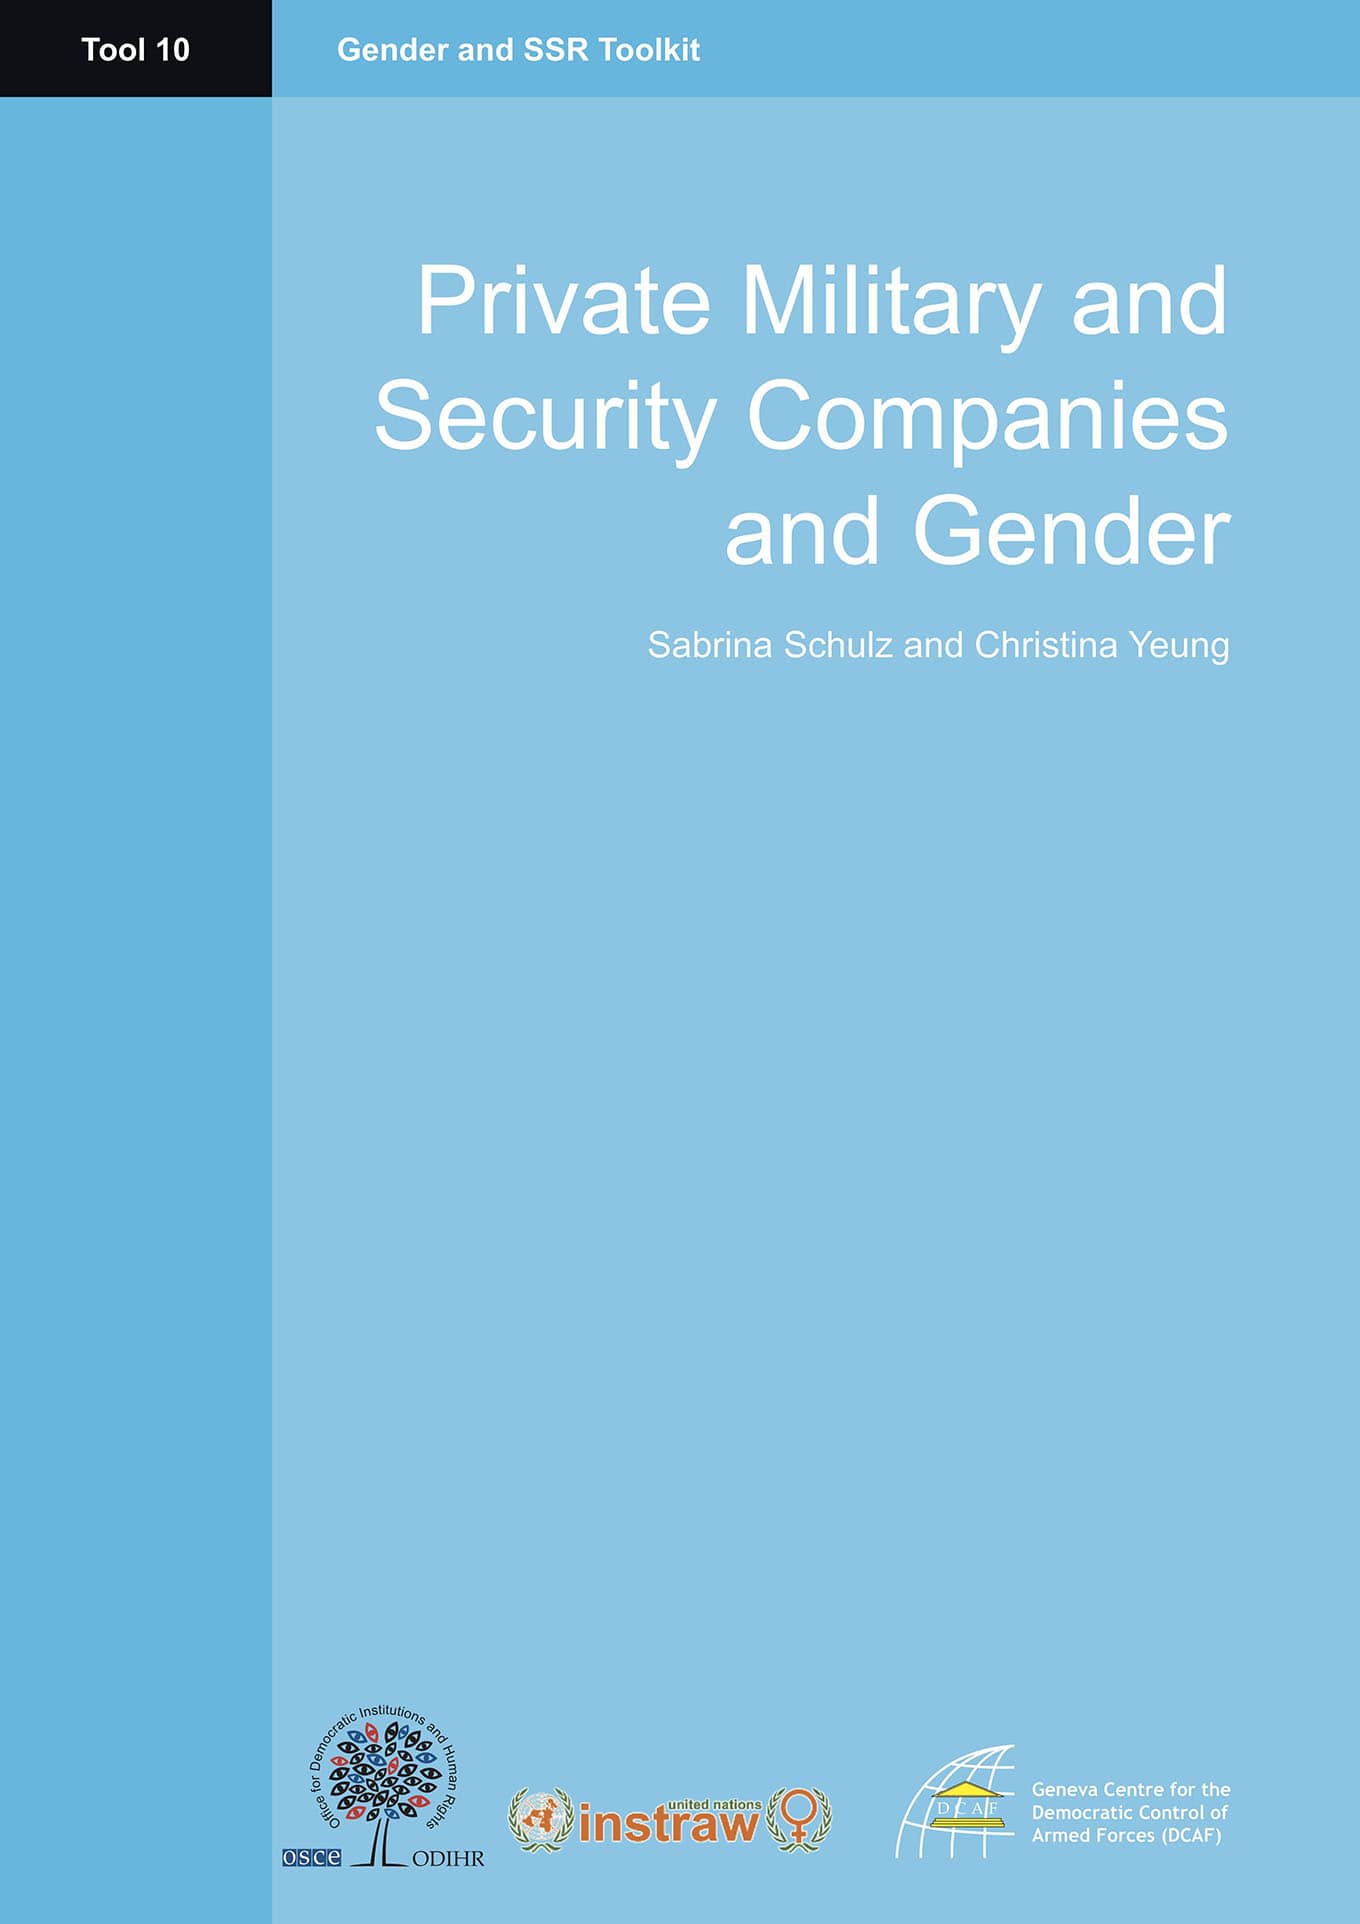 Private Military and Security Companies and Gender – (Tool 10) (DCAF, OSCE/ODIHR, UN-INSTRAW, 2008)